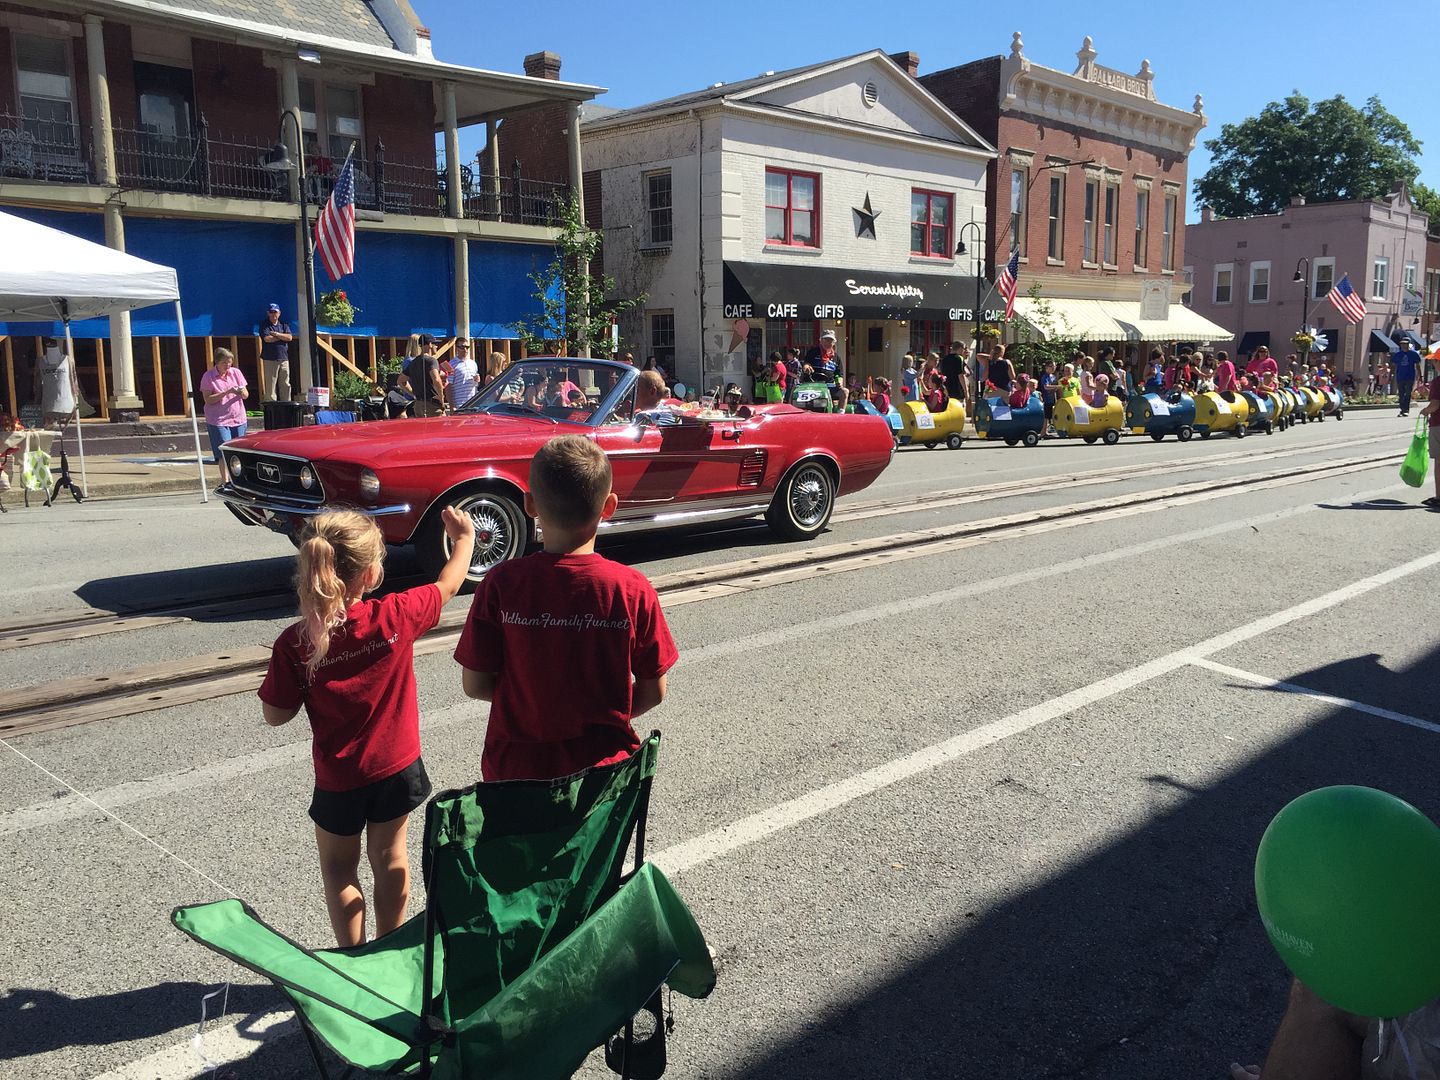  photo Oldham county day waving to parade_zps2bx1wlcf.jpg